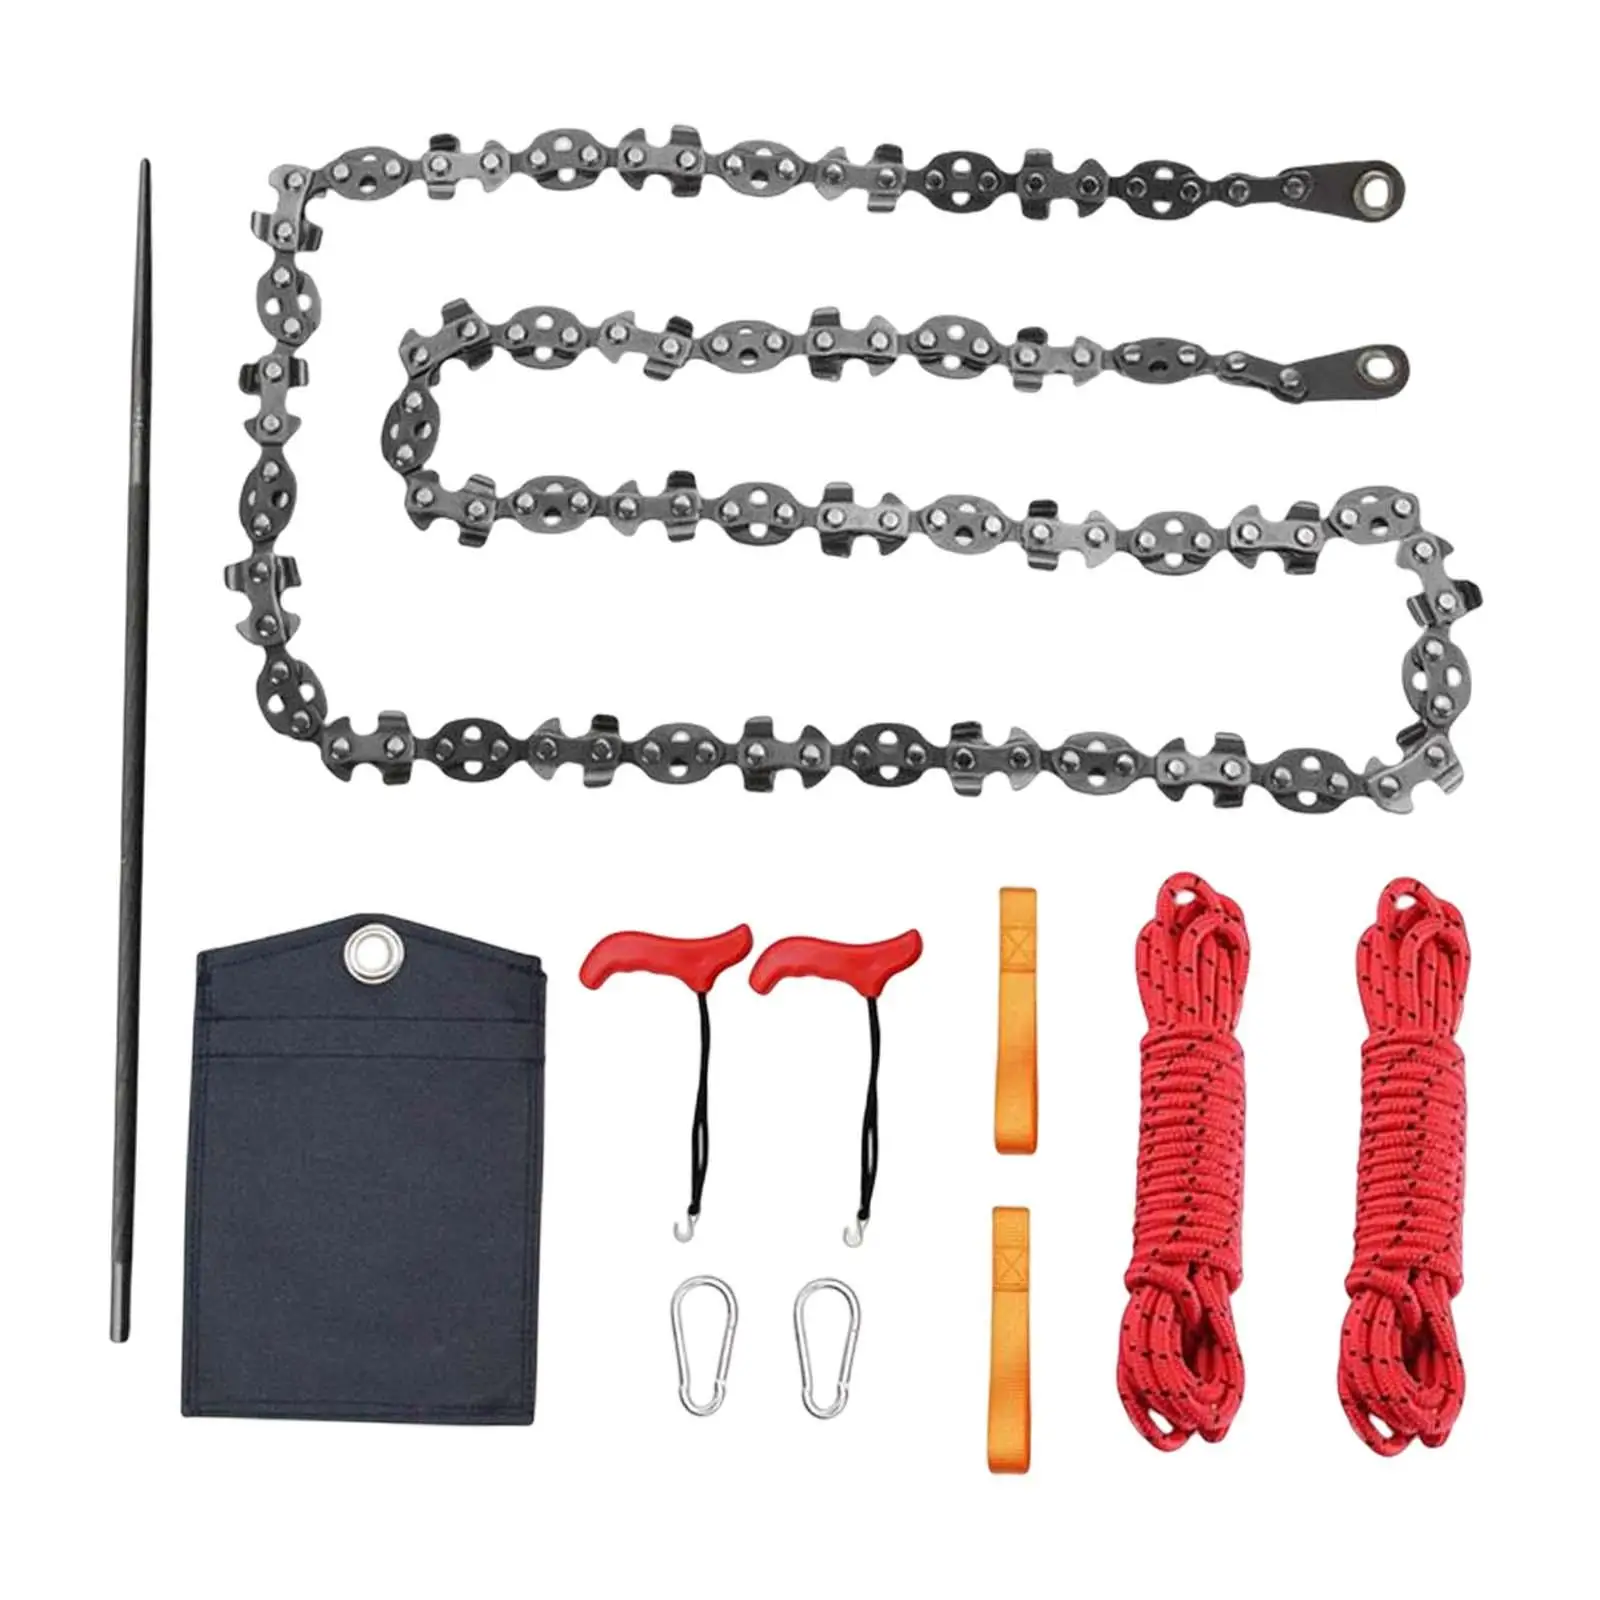 Portable Hand Chain Saw with Storage Bag Zipper Saw Emergency Saw Pocket for Gardening Wood Cutting Outdoor Camping Emergency